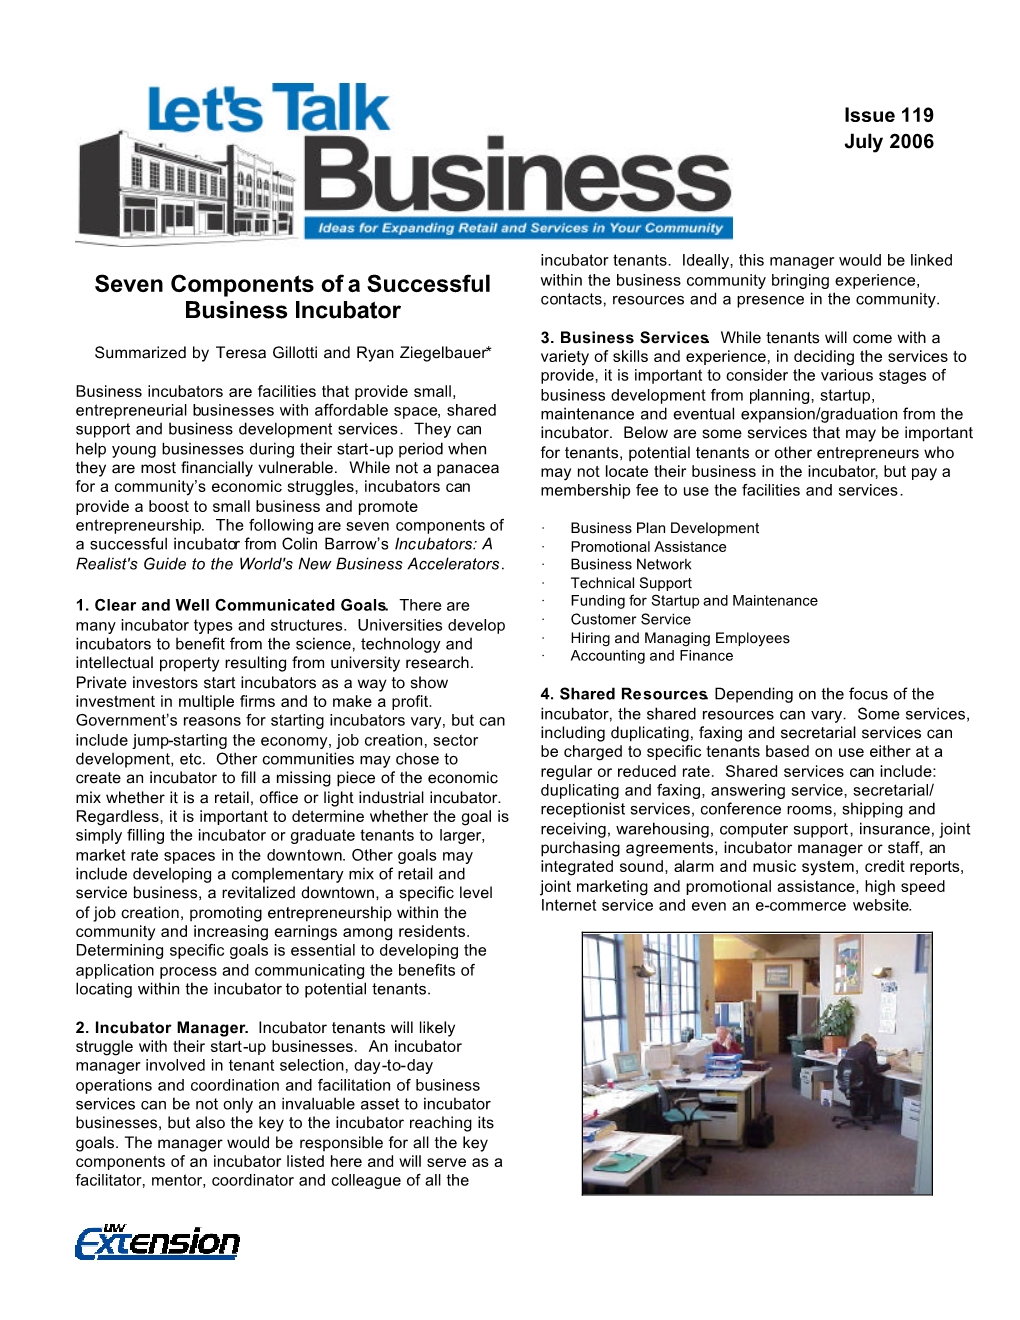 Seven Components of a Successful Business Incubator